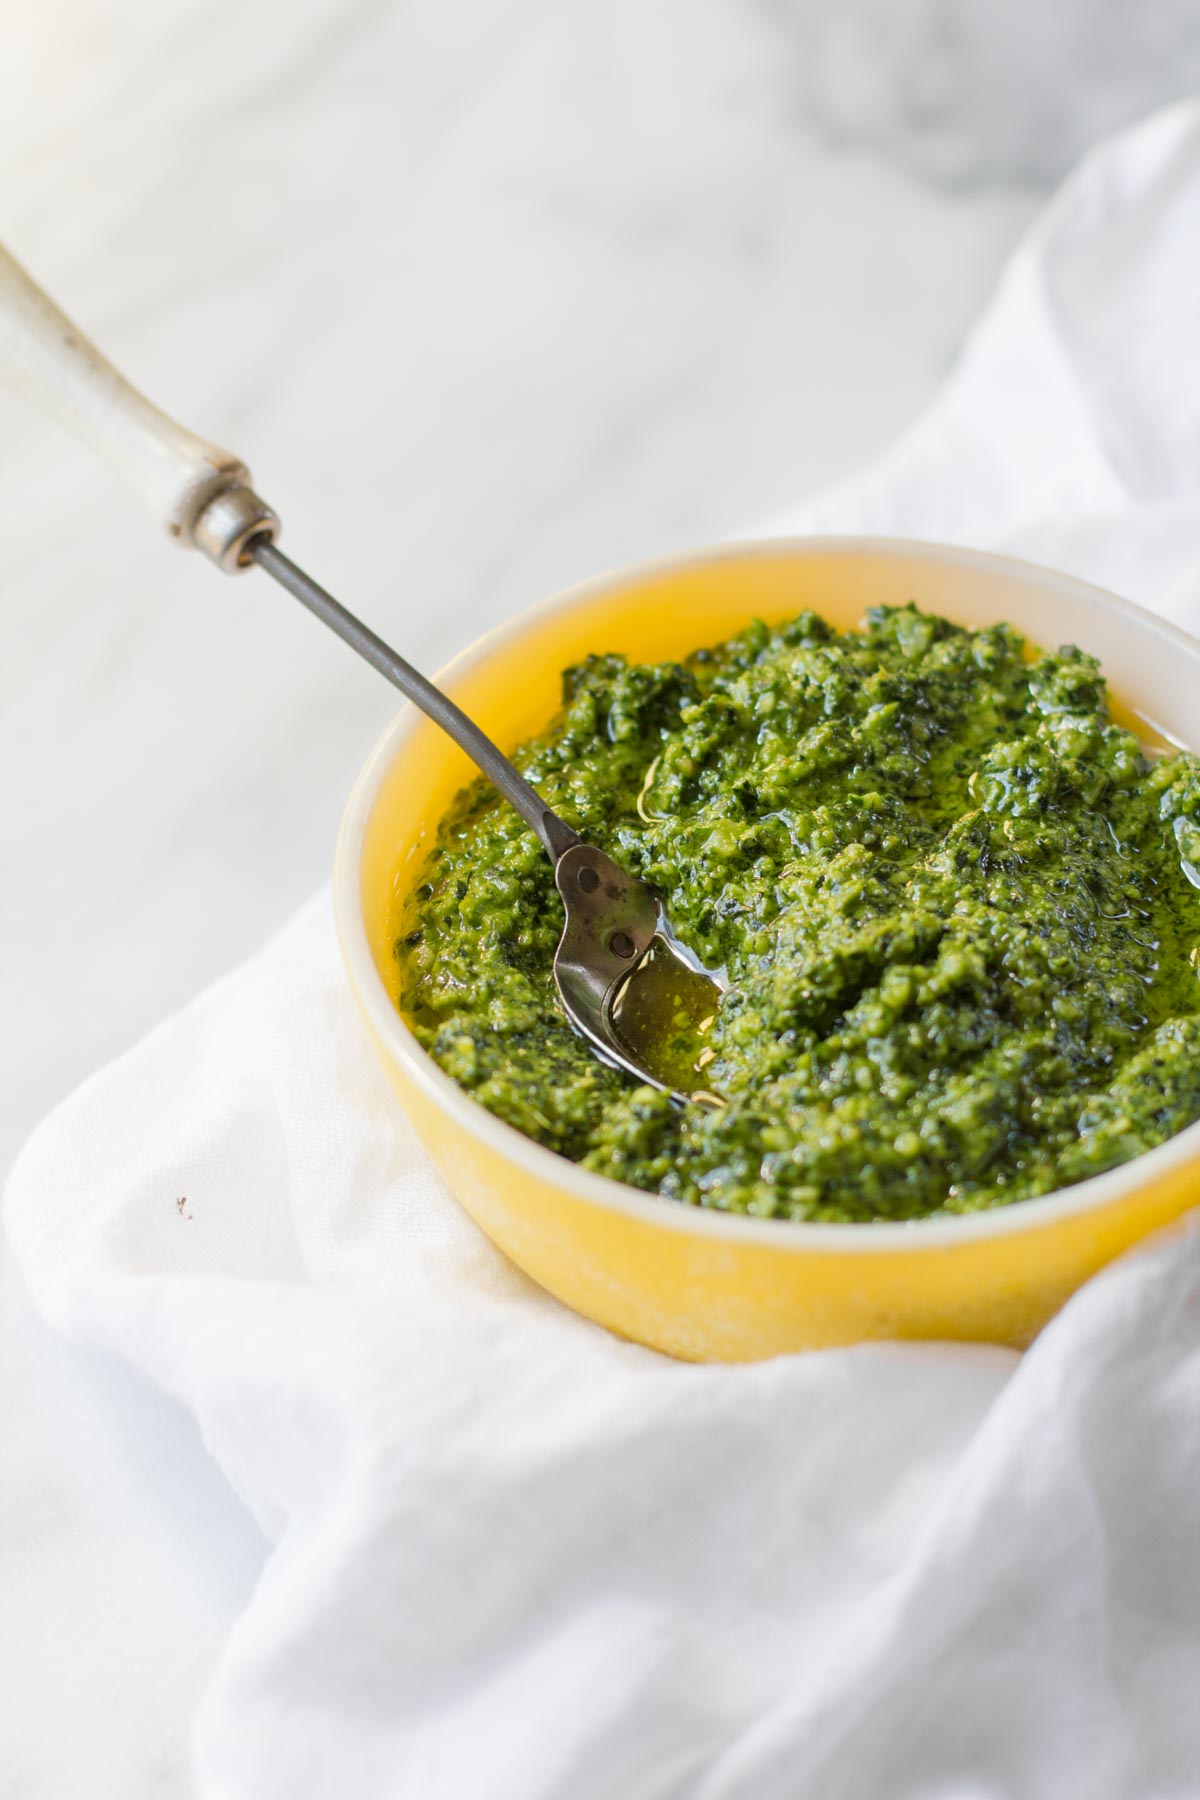 A bowl of Kale and Walnut Pesto sits with a spoon, on a white background.